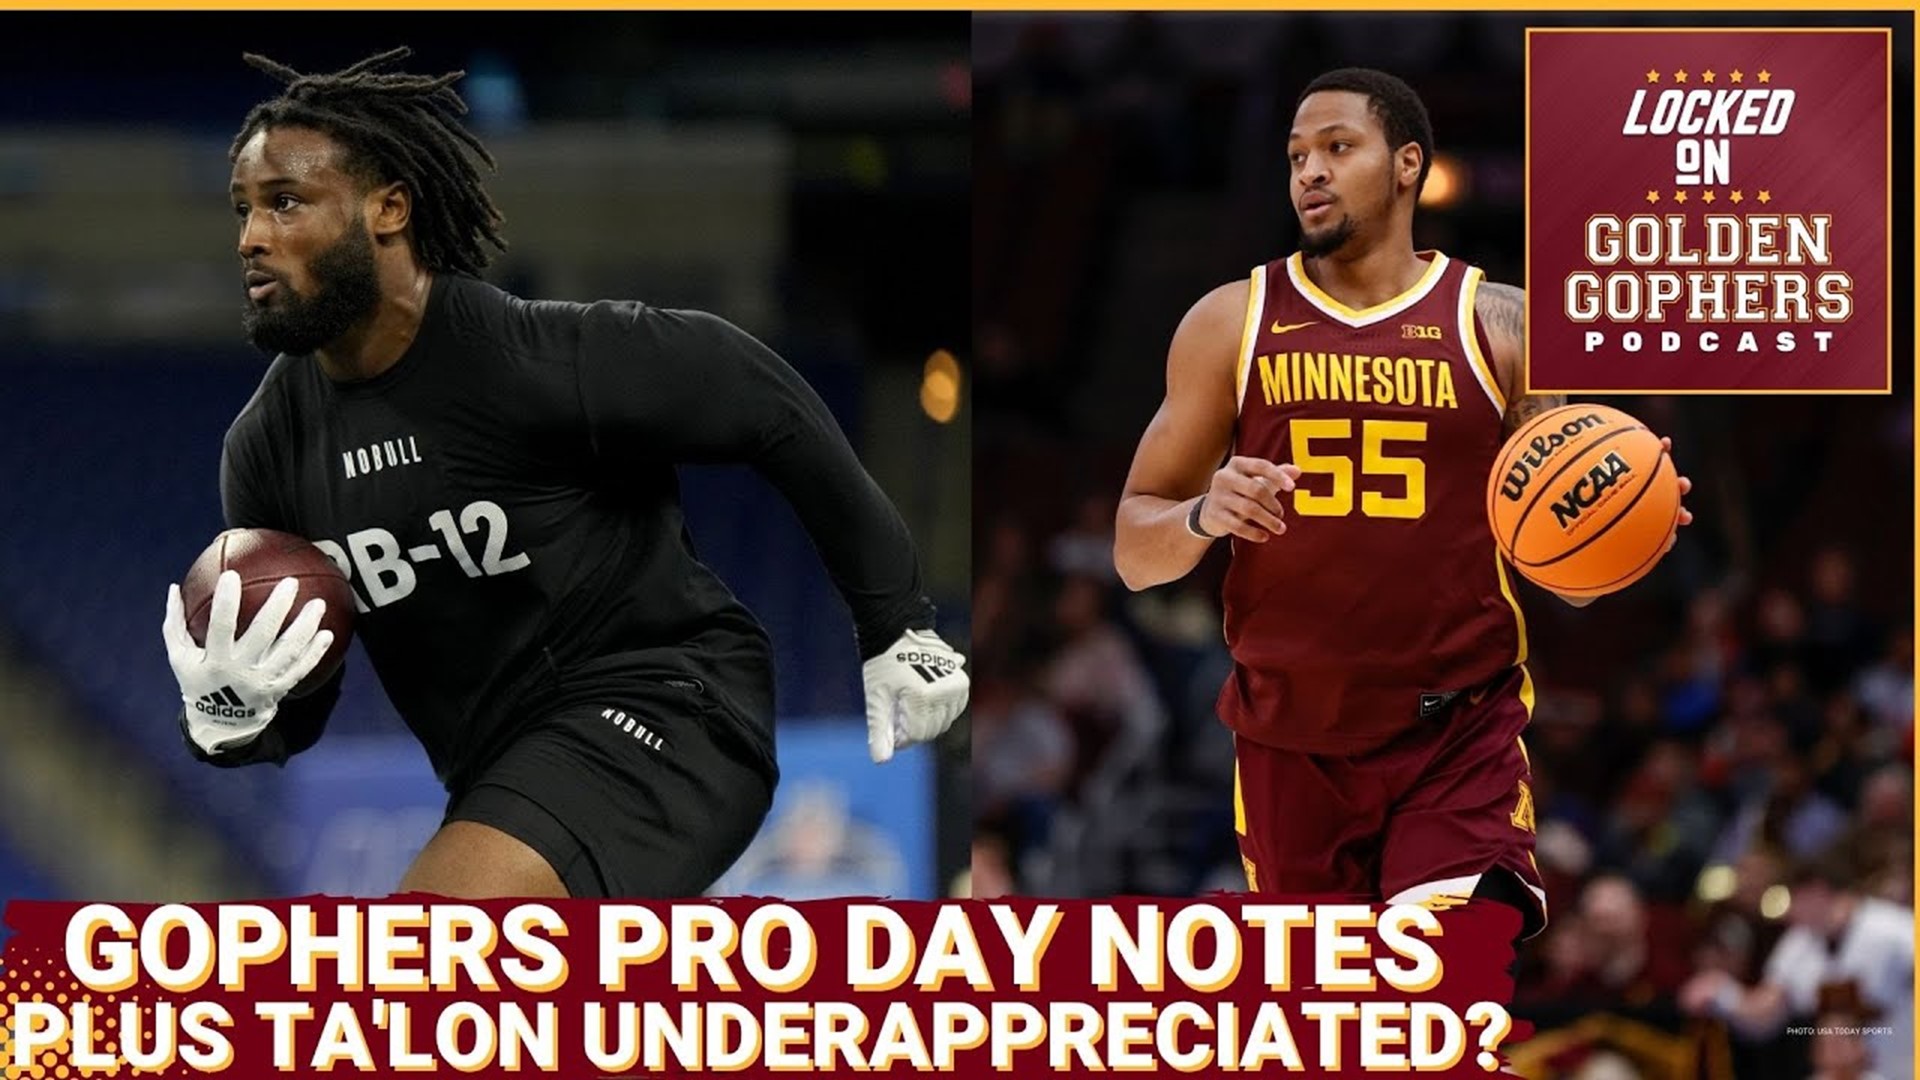 Today we discuss the Minnesota Gophers Pro Day. How players did and also could the Vikings be targeting someone from Minnesota with how many people they had present?